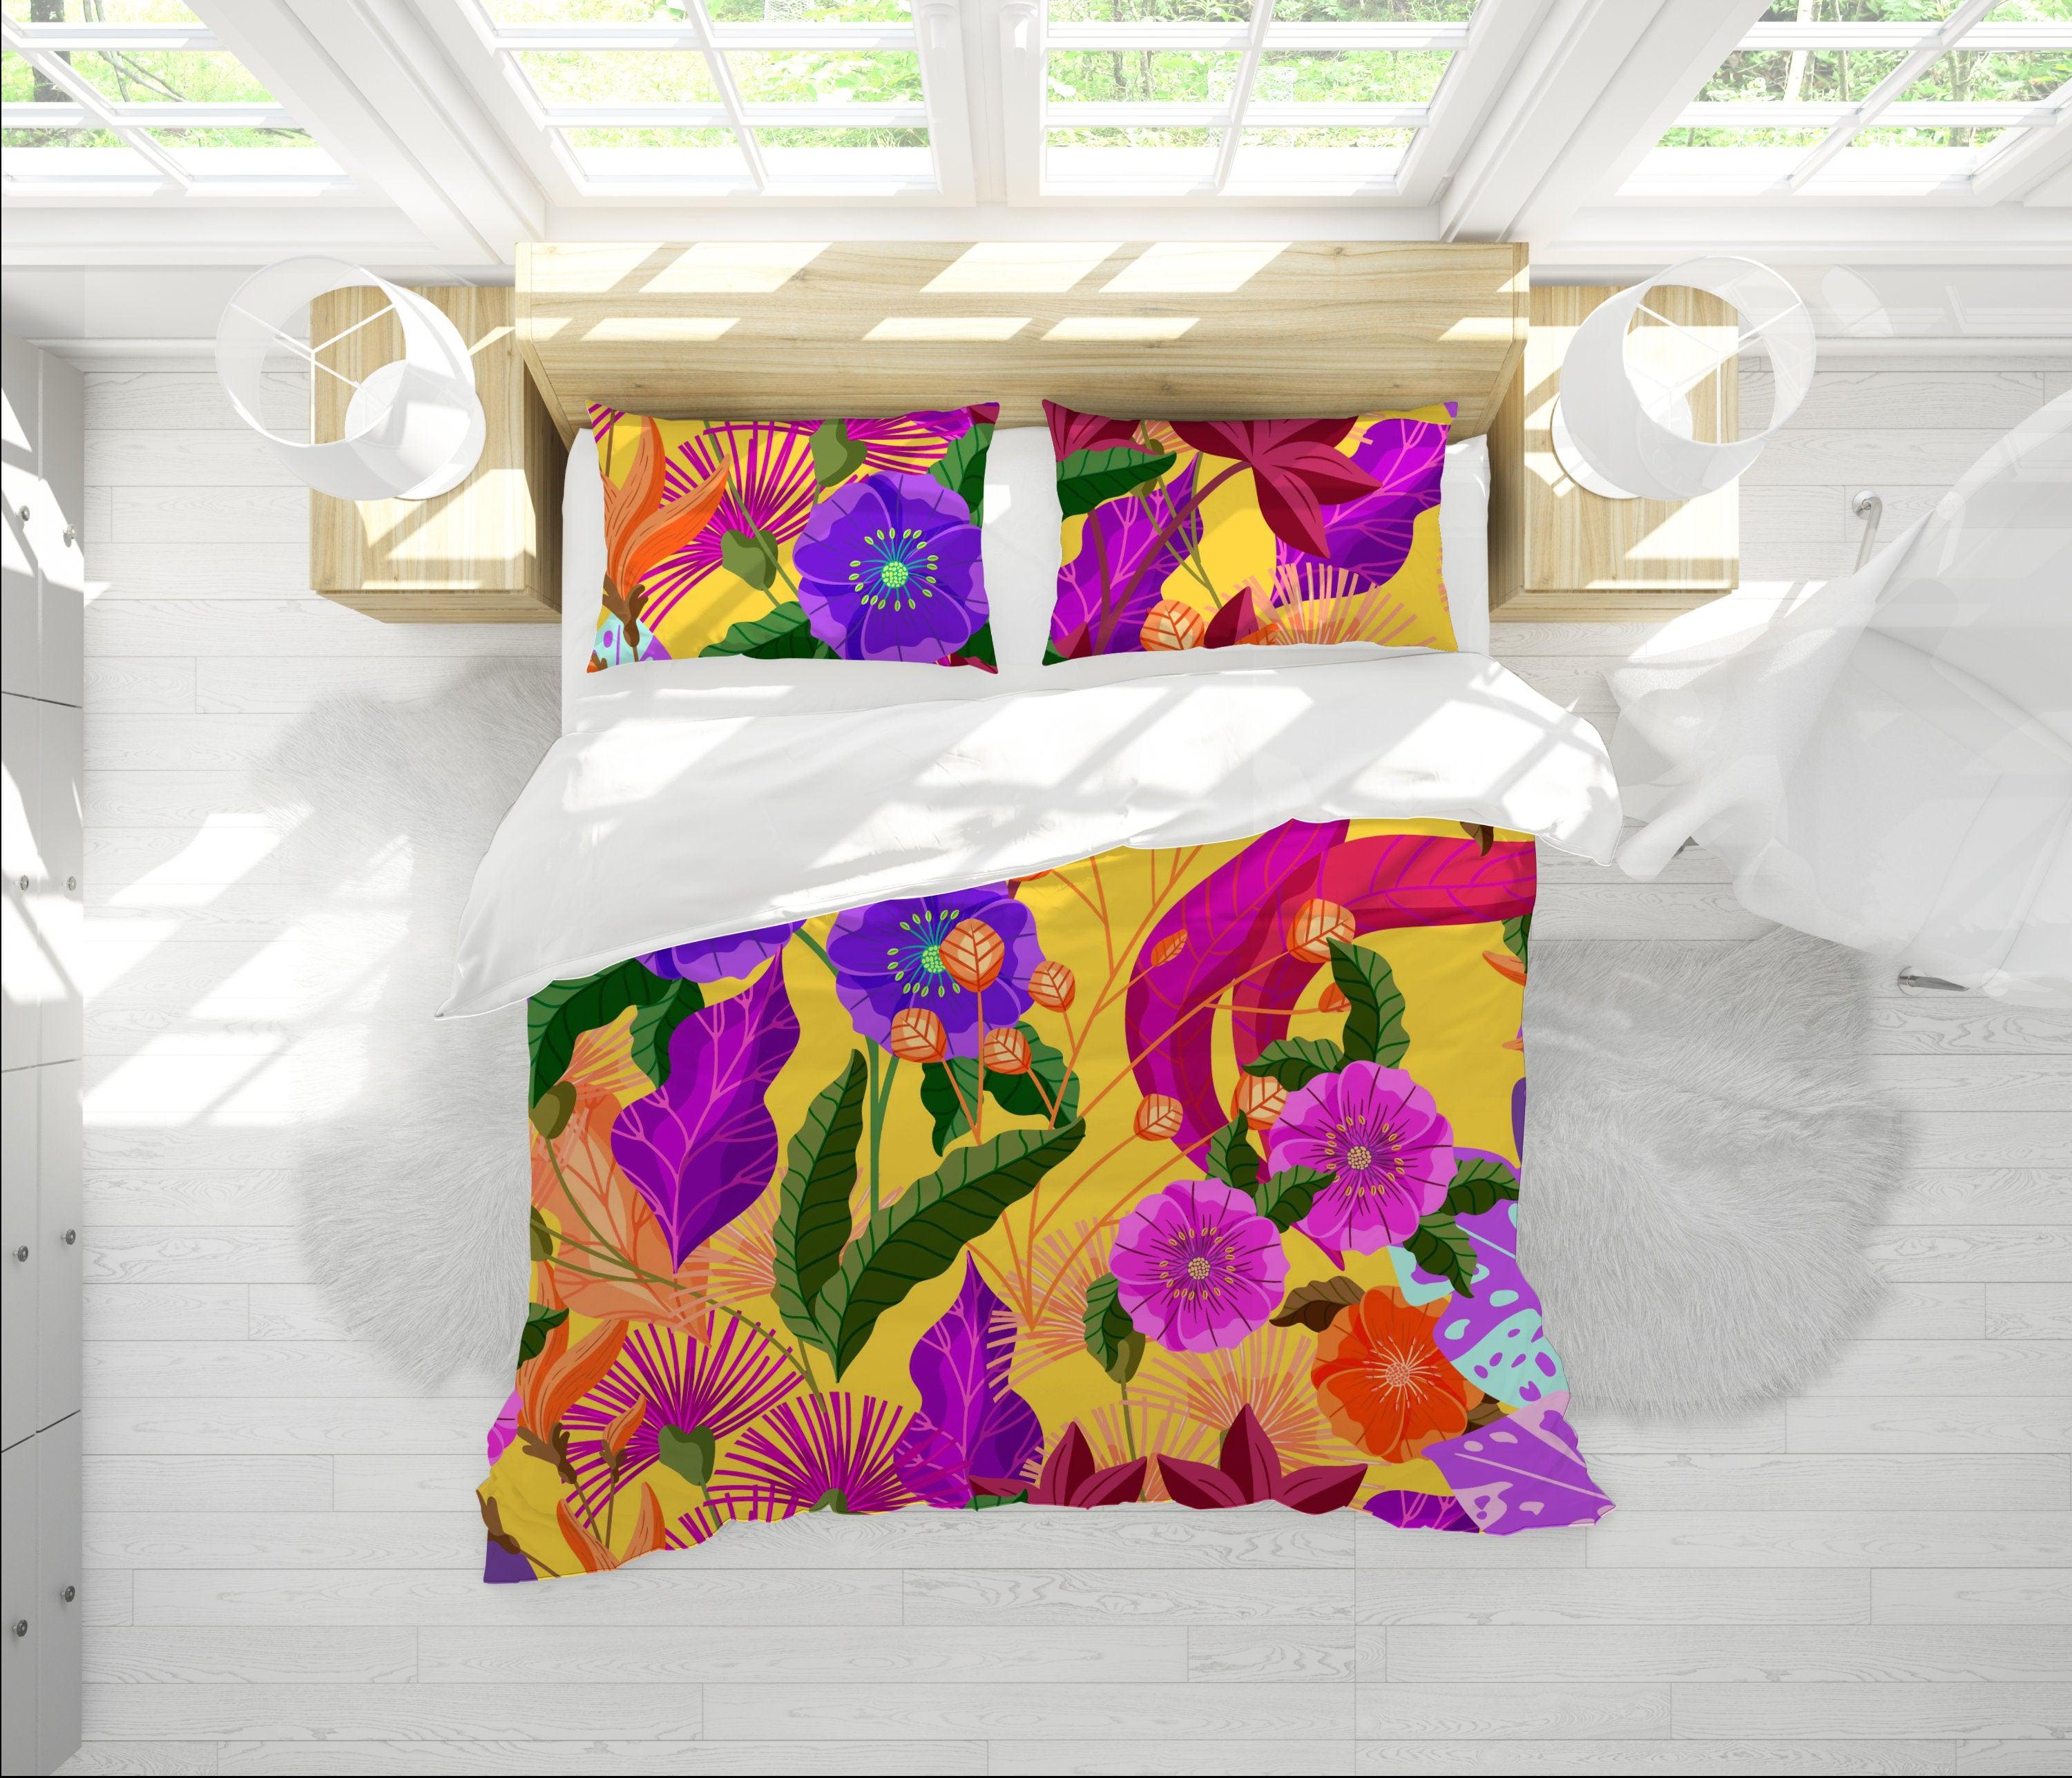 daintyduvet Tropical Yellow Duvet Cover Colorful Floral Design | Bedding Set with Pillow Cover Case